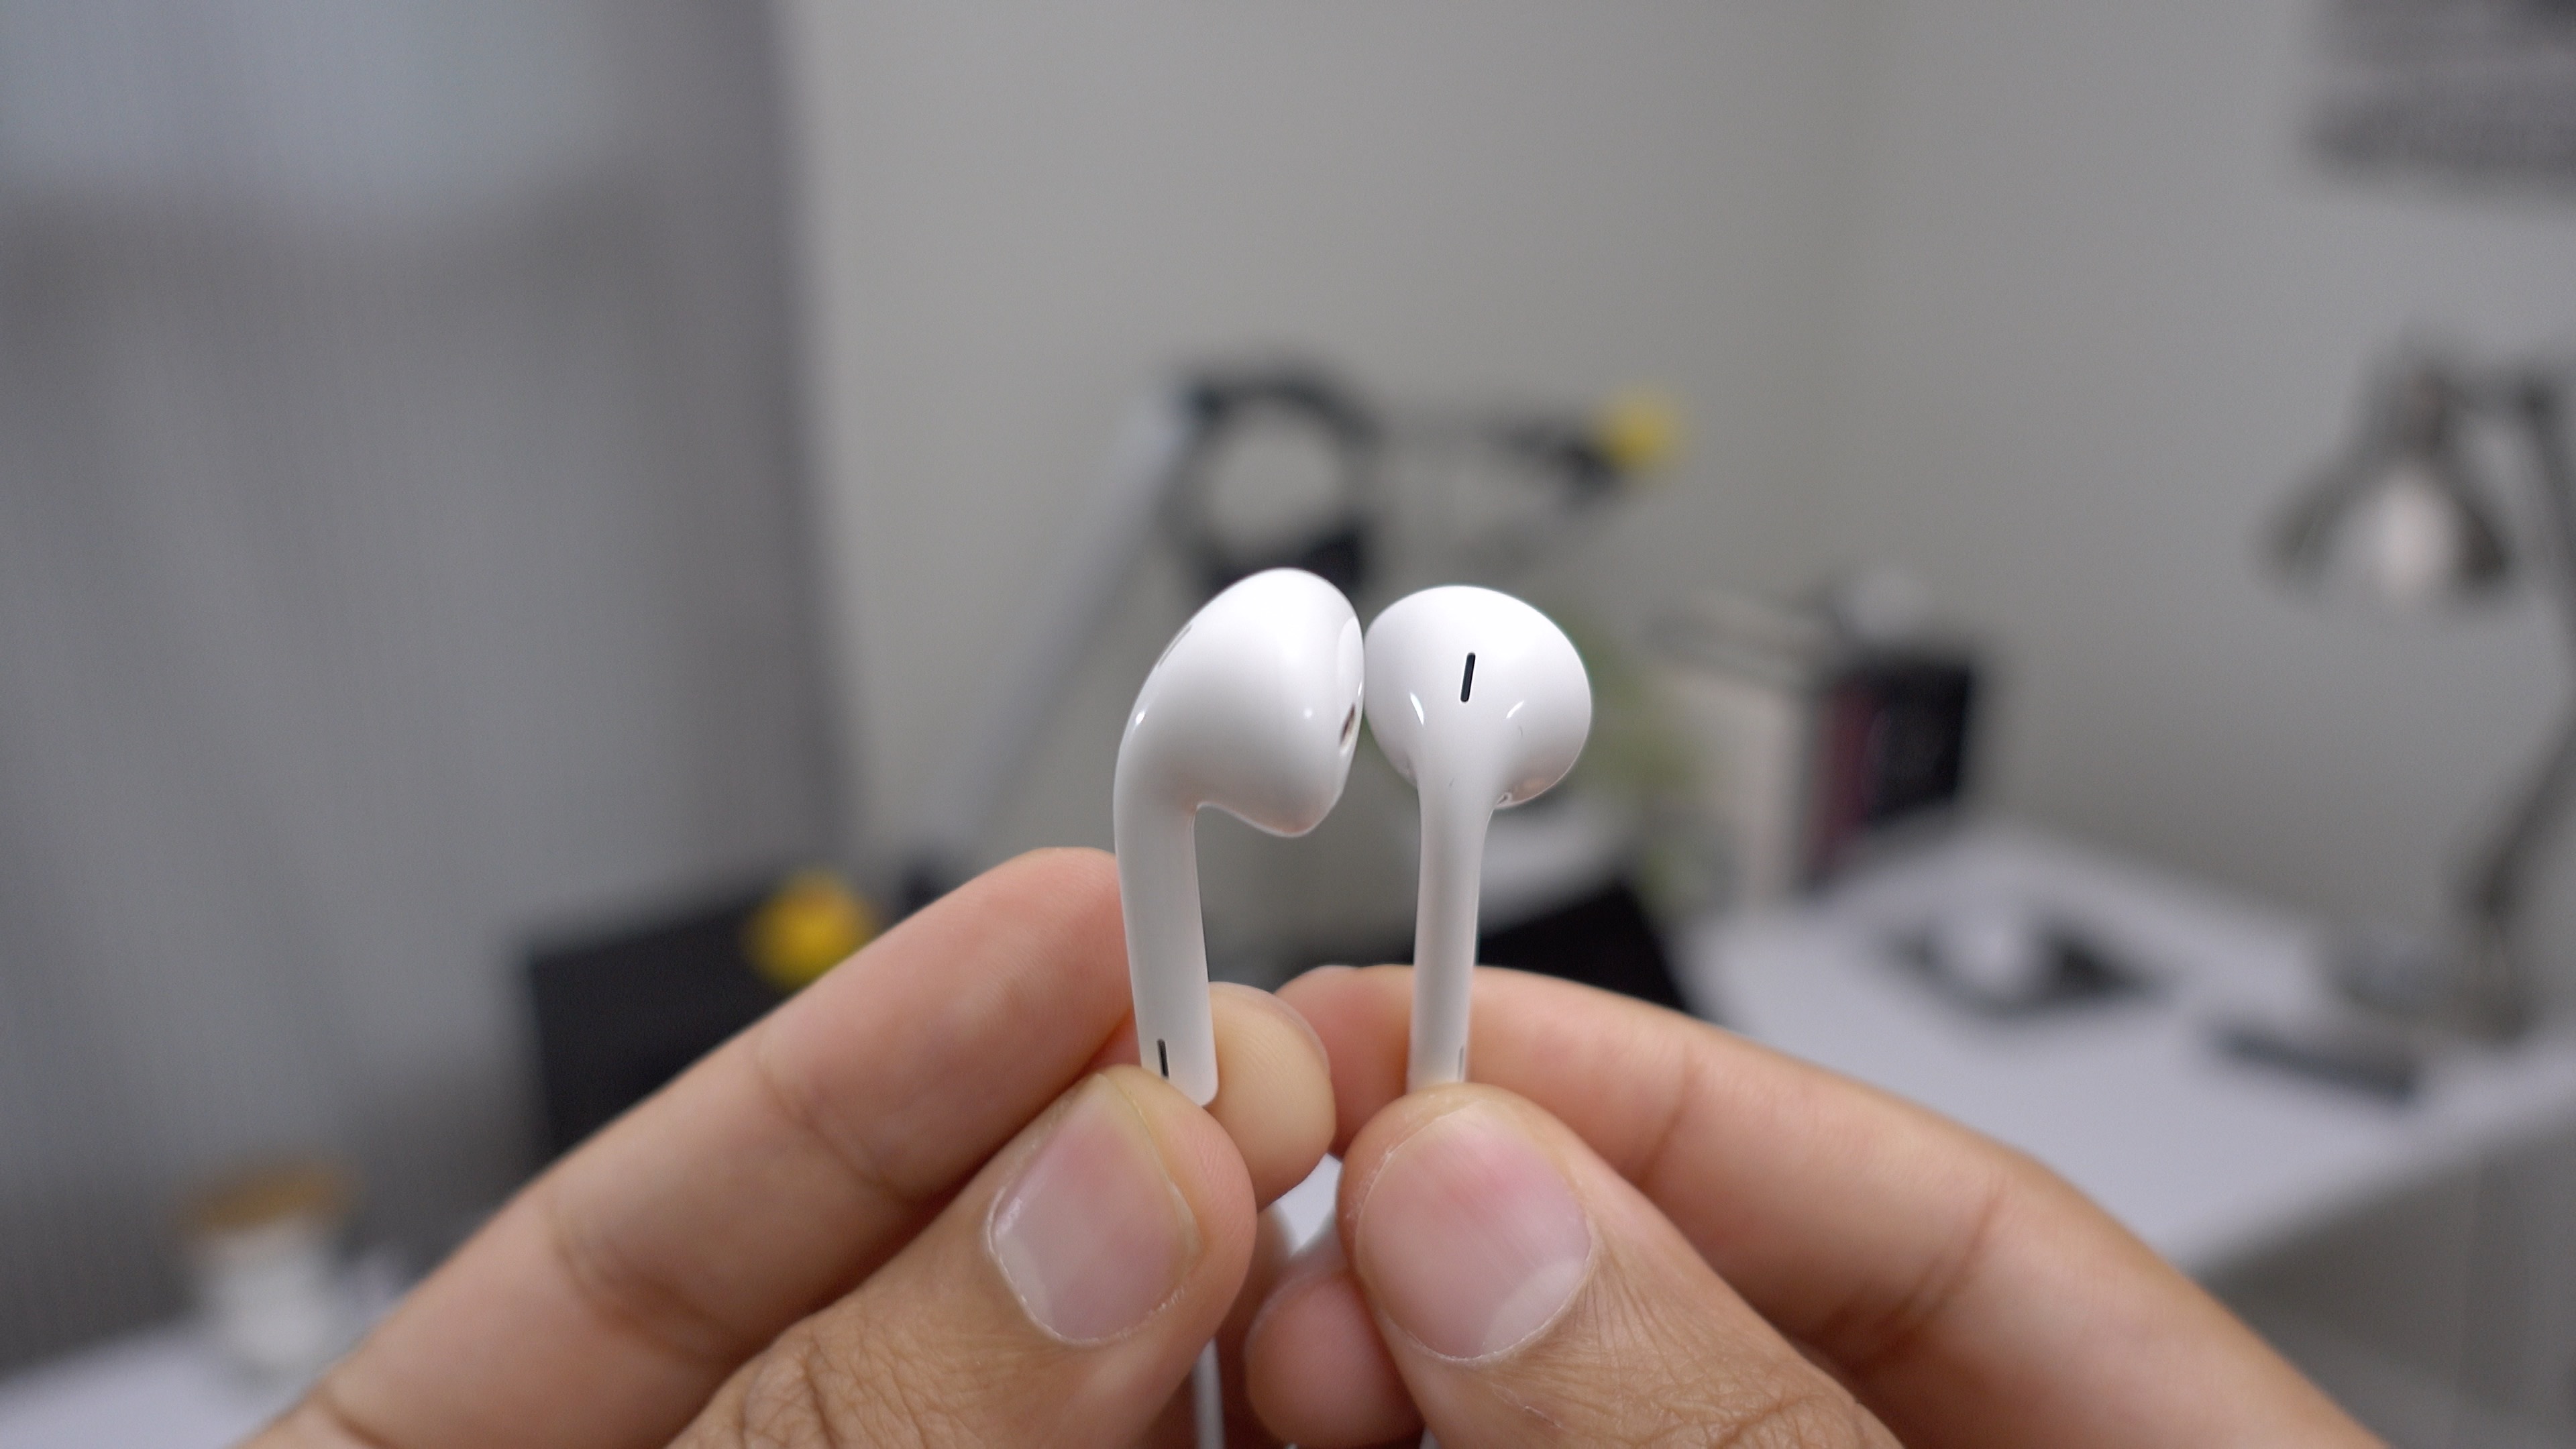 Hands-on: How the new Lightning EarPods compare to the old 3.5mm